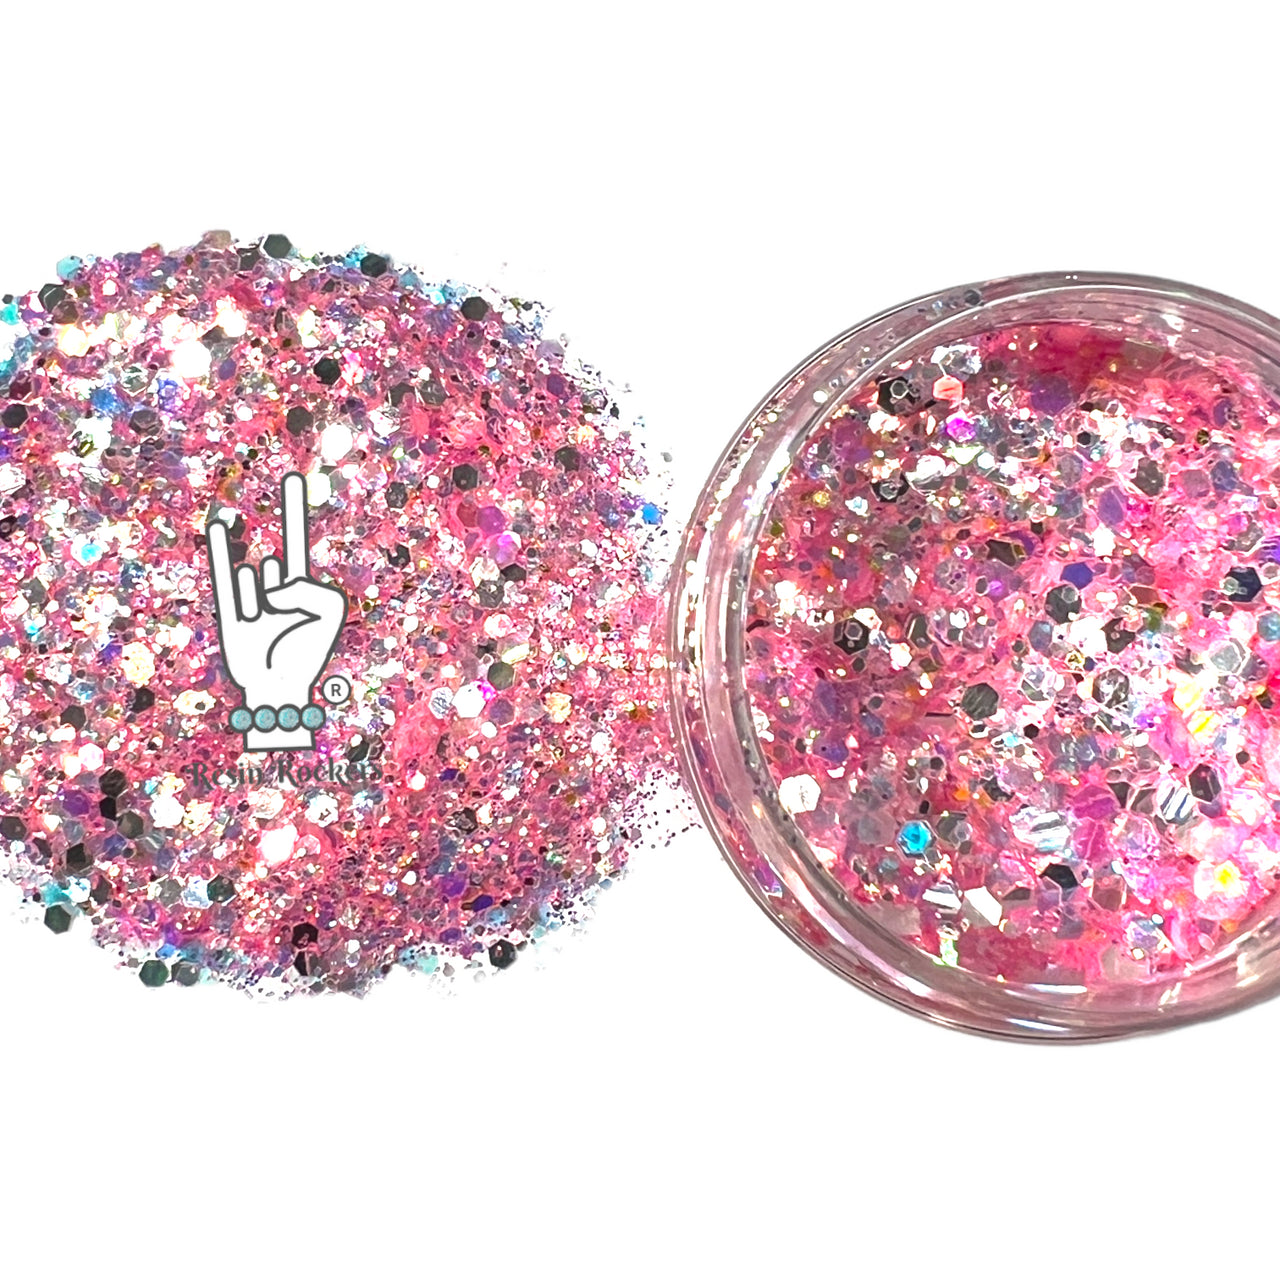 Talk Dirty To Me Resin Rockers Exclusive Glam Metal Pixie for Poxy Chunky Glitter Mix